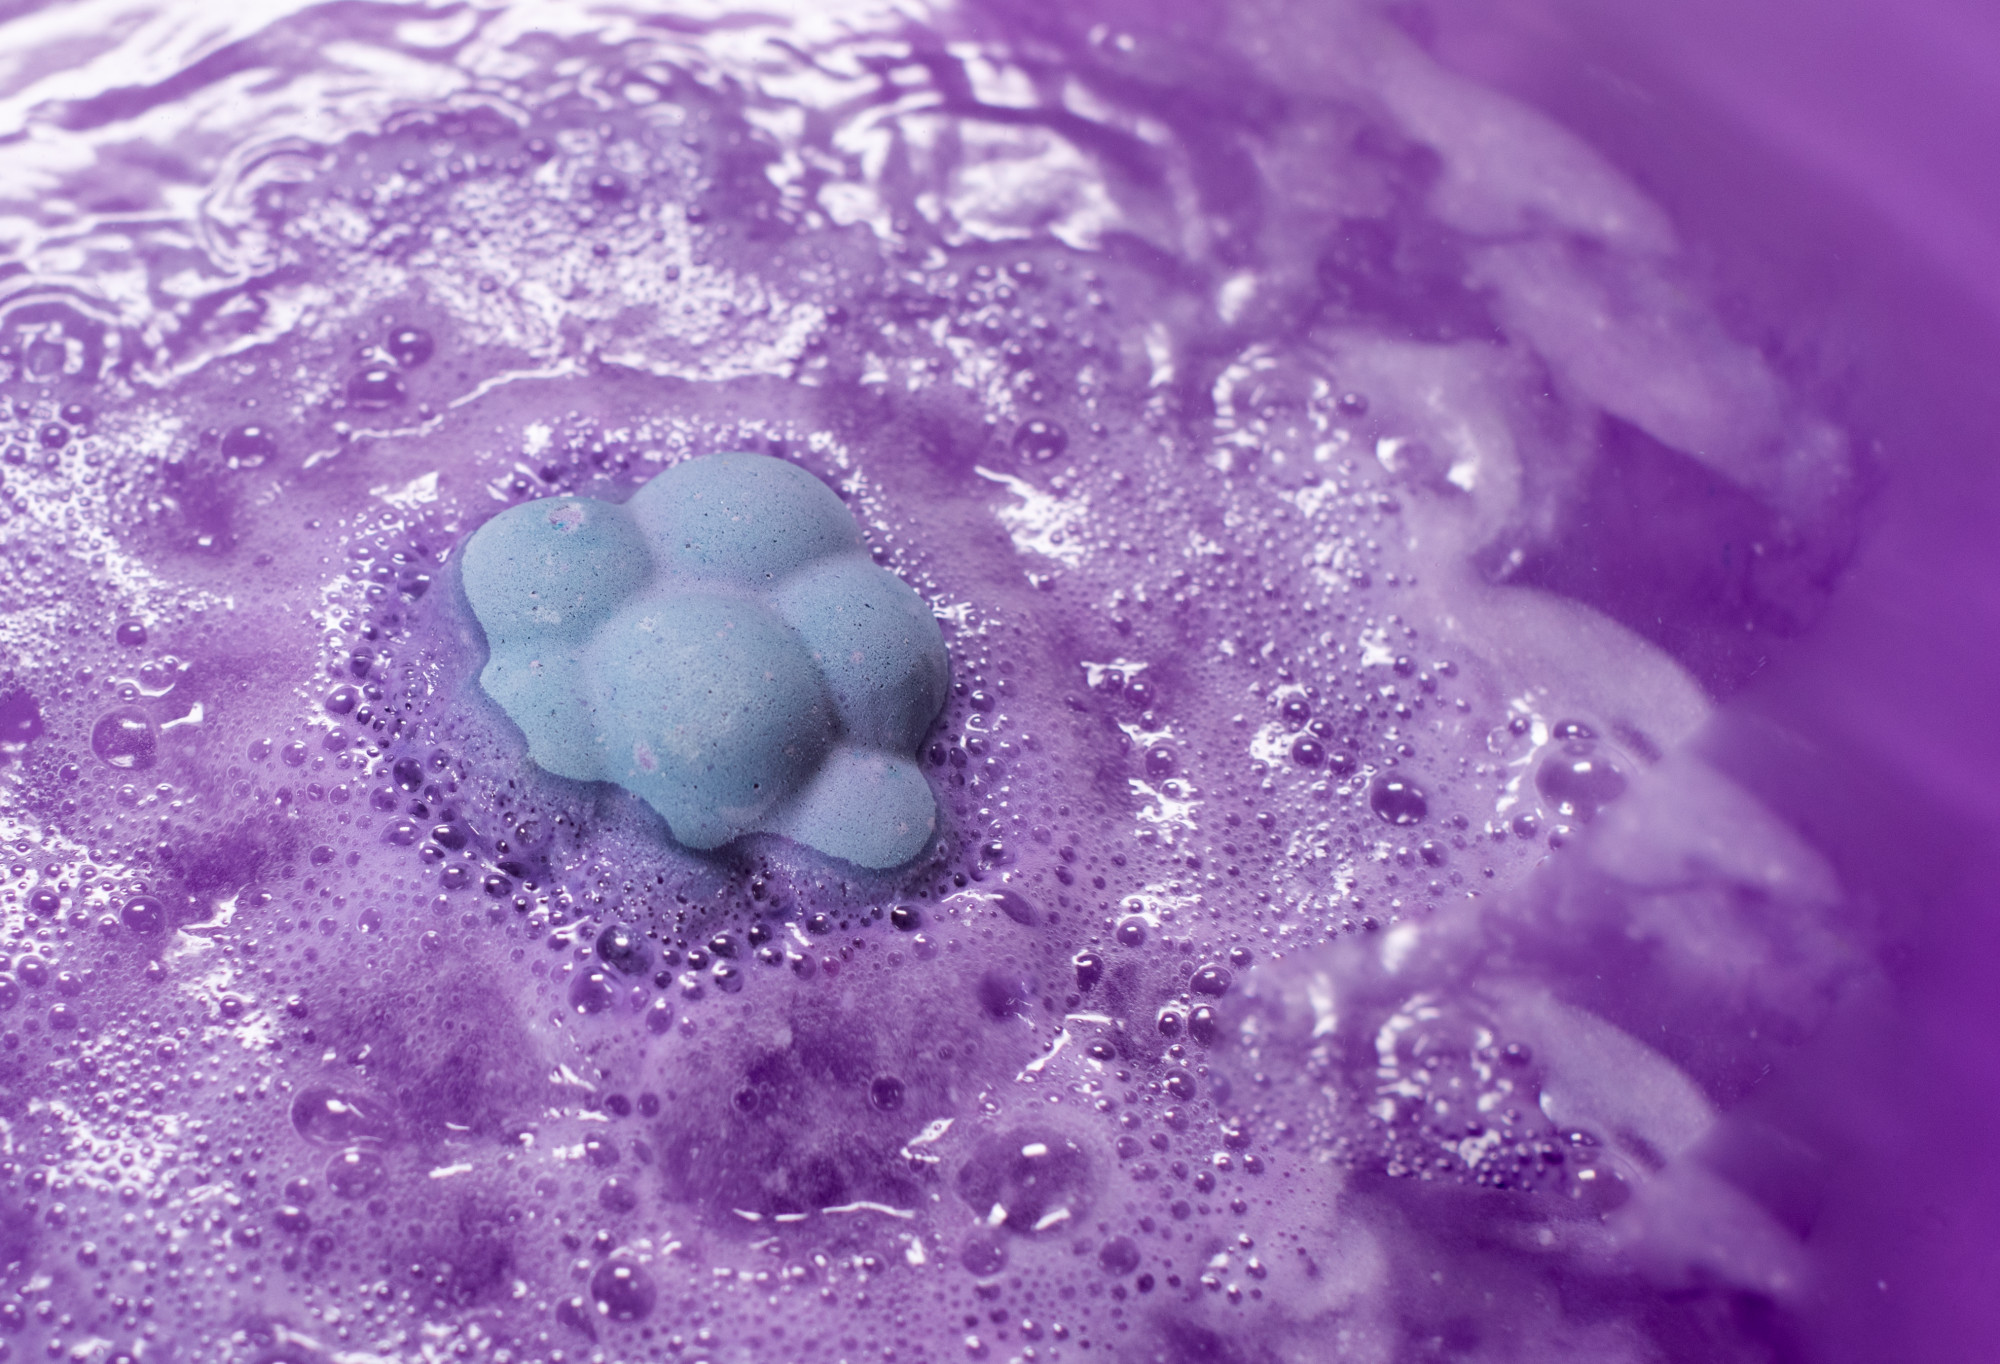 Blackberry, a baby blue, blackberry shaped bath bomb, peeking out from amethyst purple water, full of surface level bubbles.